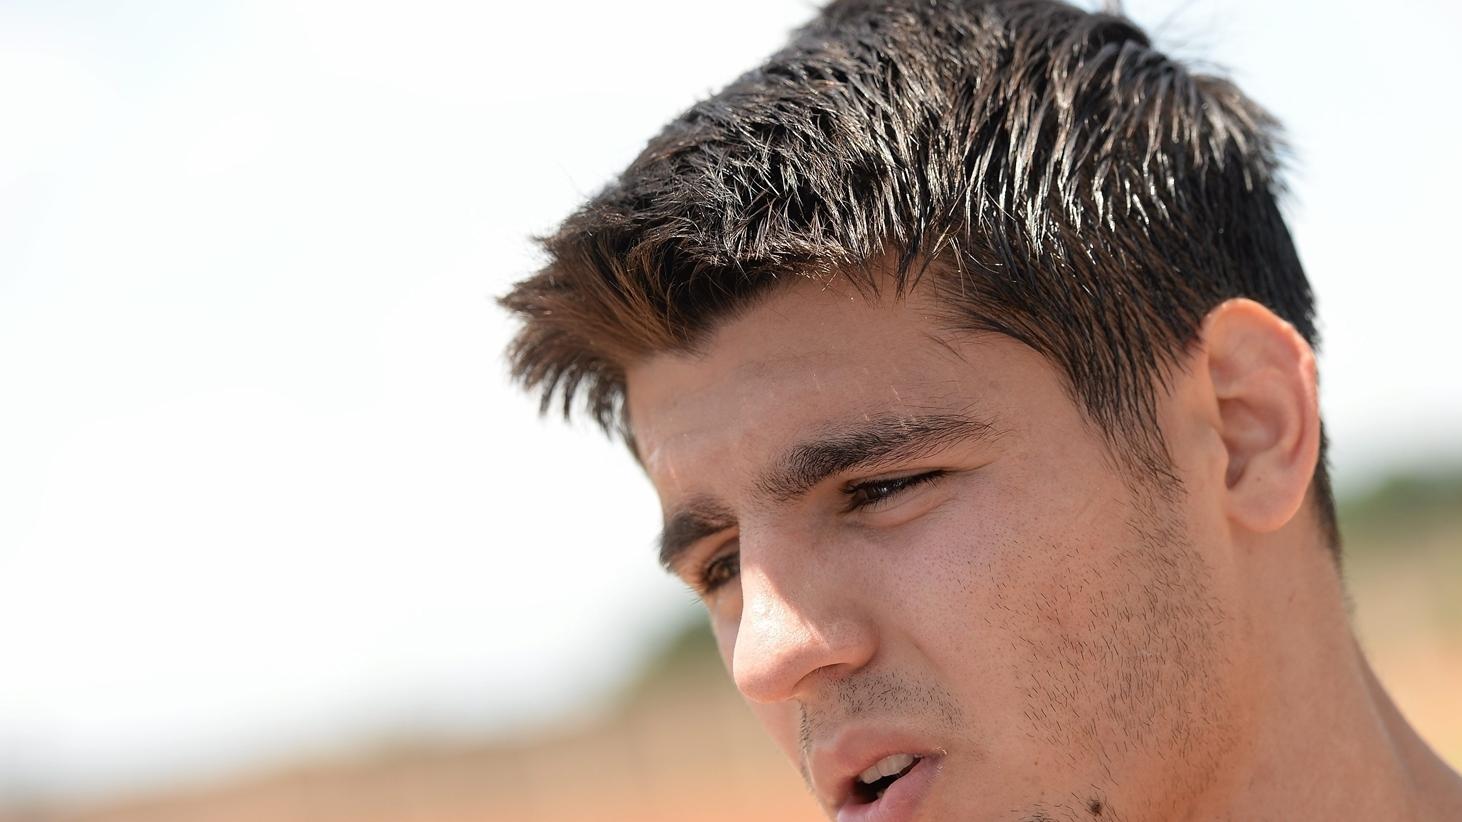 Morata driven by past success and present goals | Under-21 